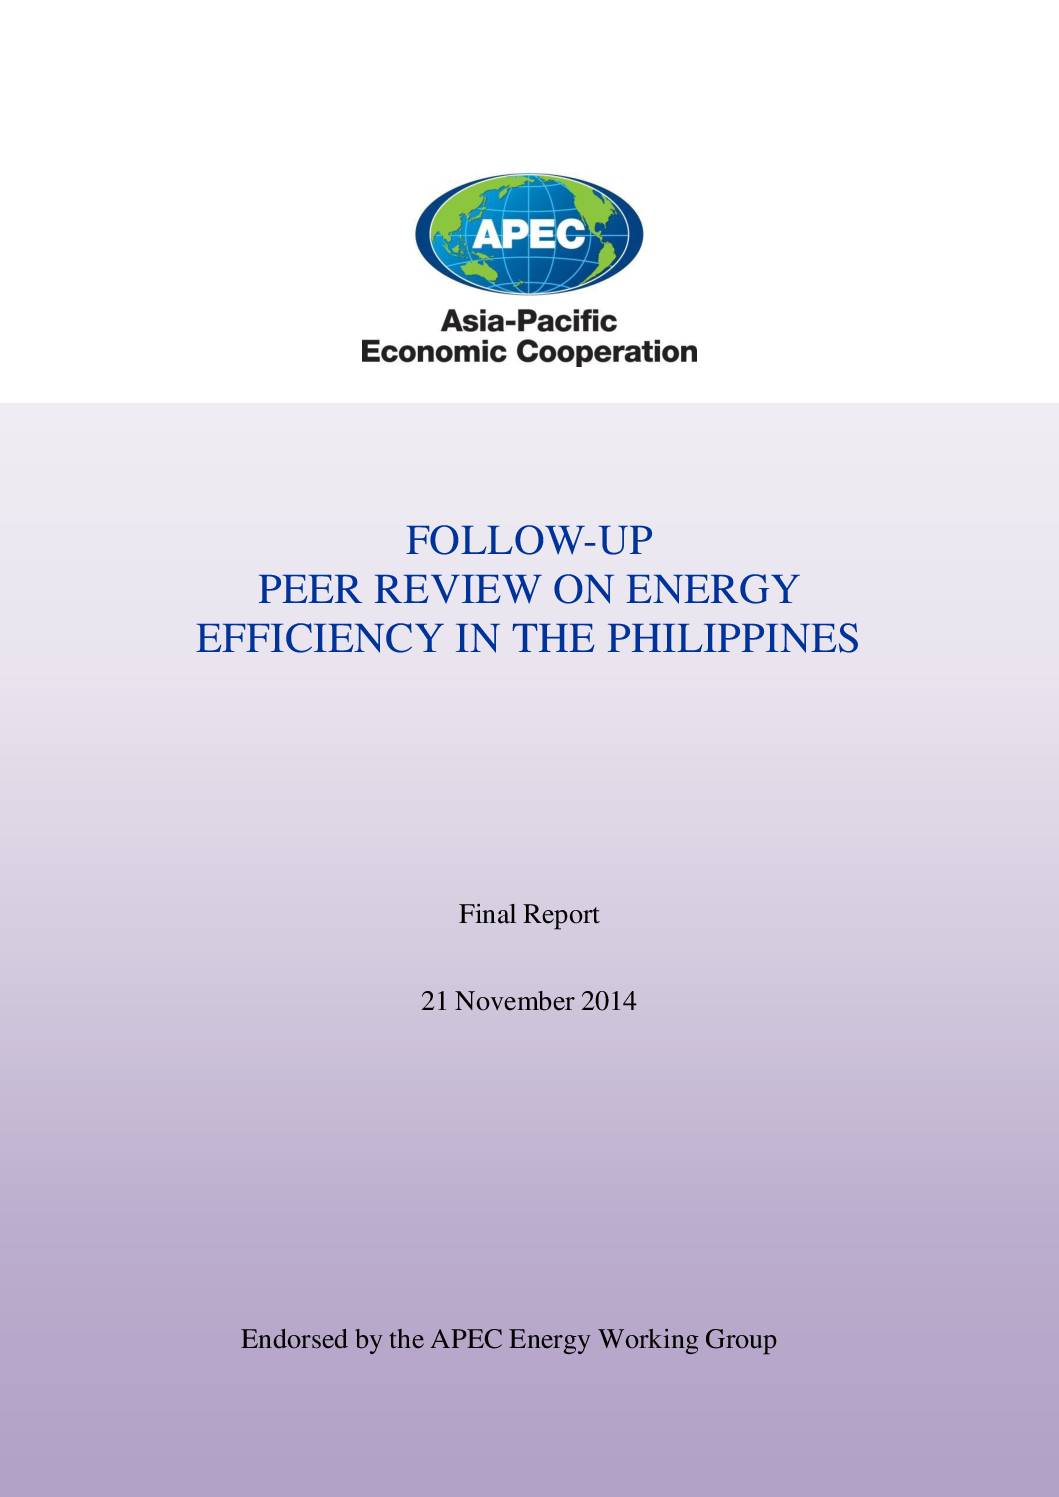 Follow-up Peer Review on Energy Efficiency in the Philippines